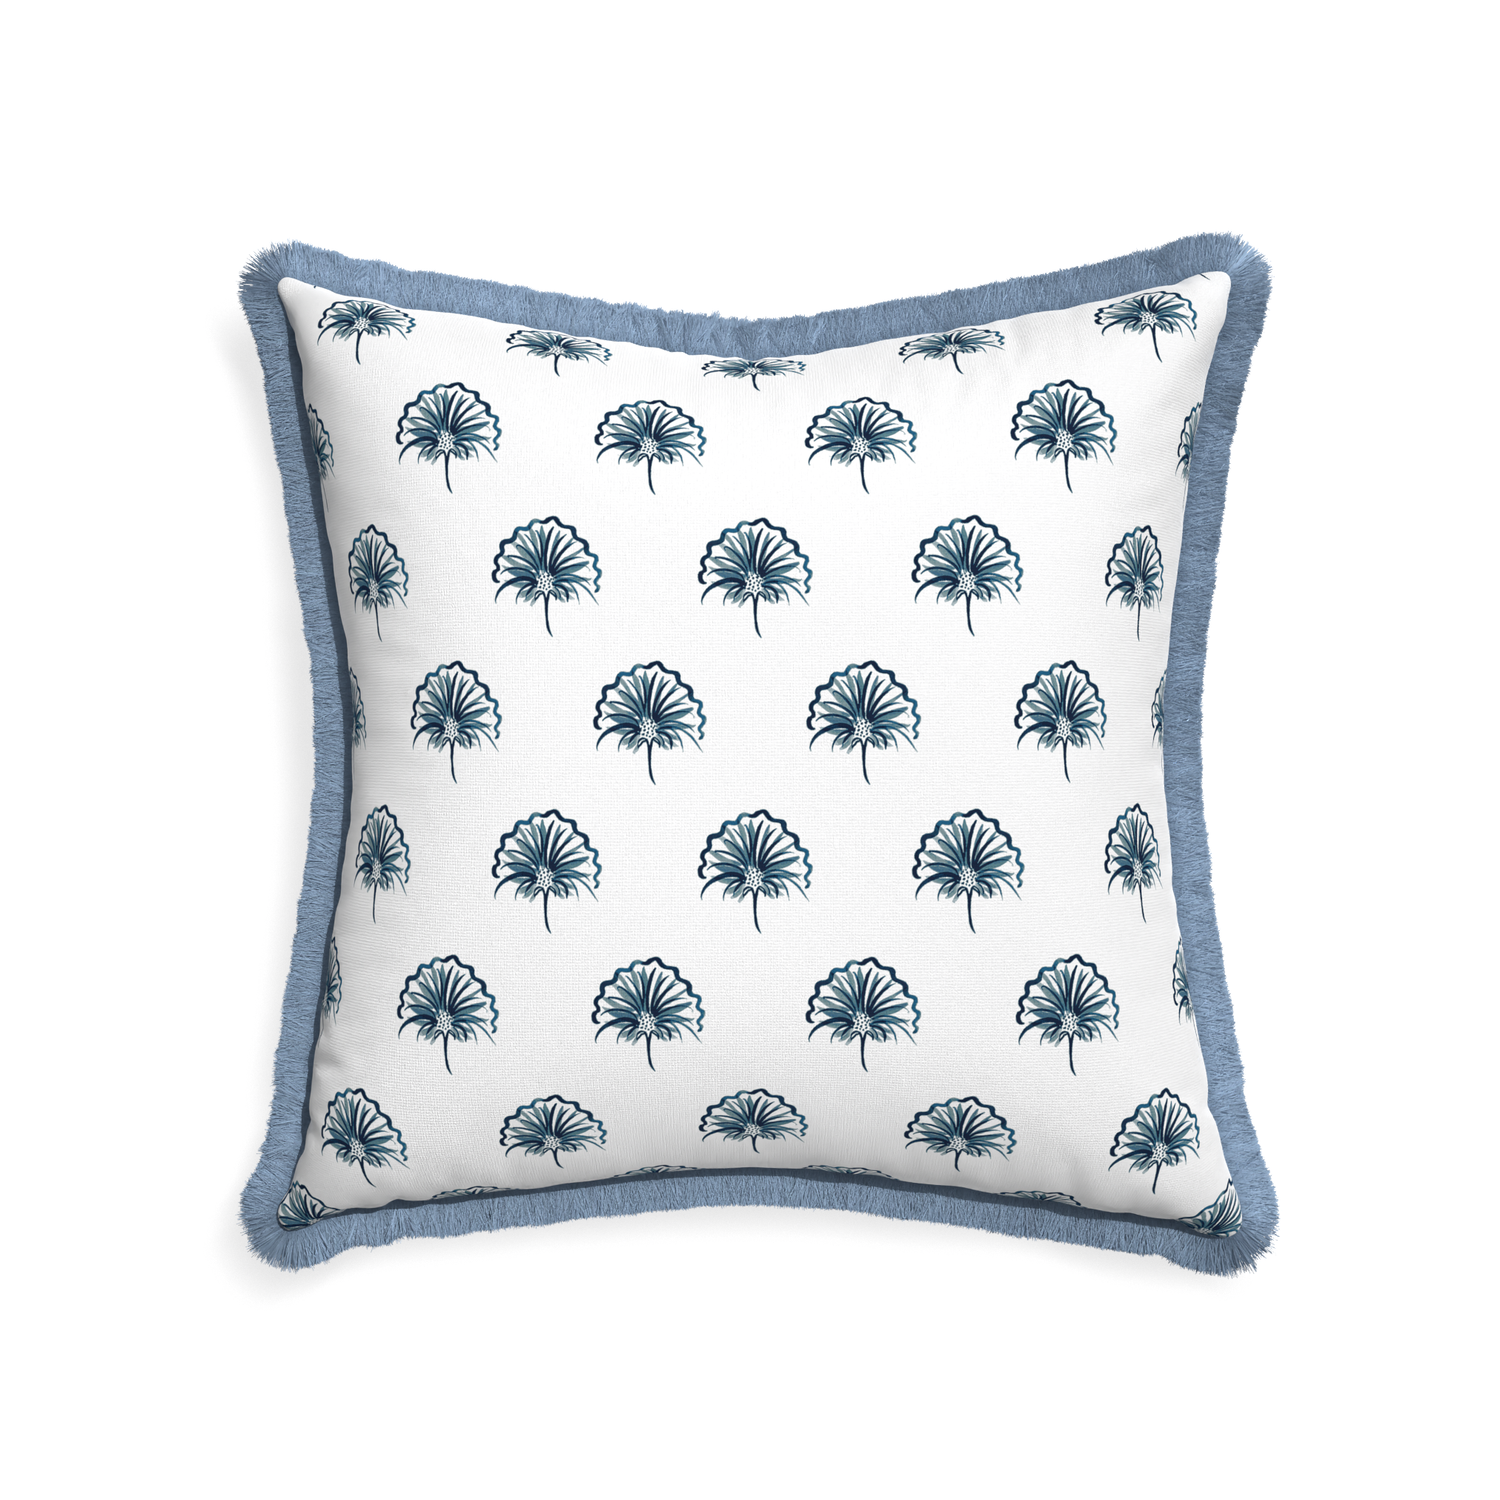 22-square penelope midnight custom floral navypillow with sky fringe on white background